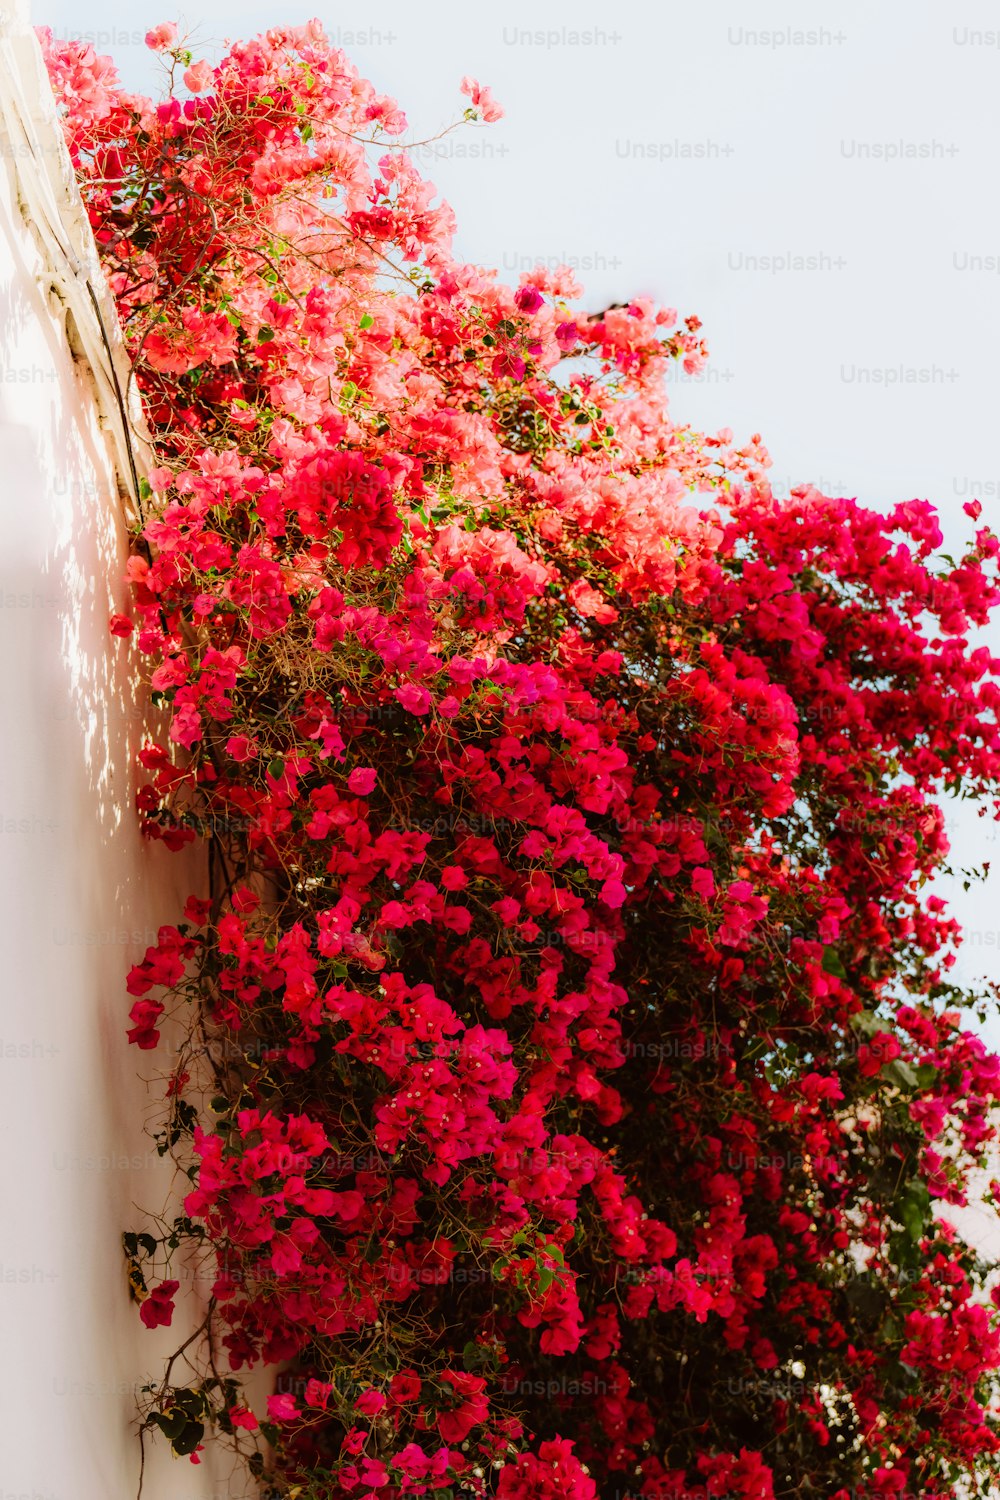 red flowers growing on the side of a building